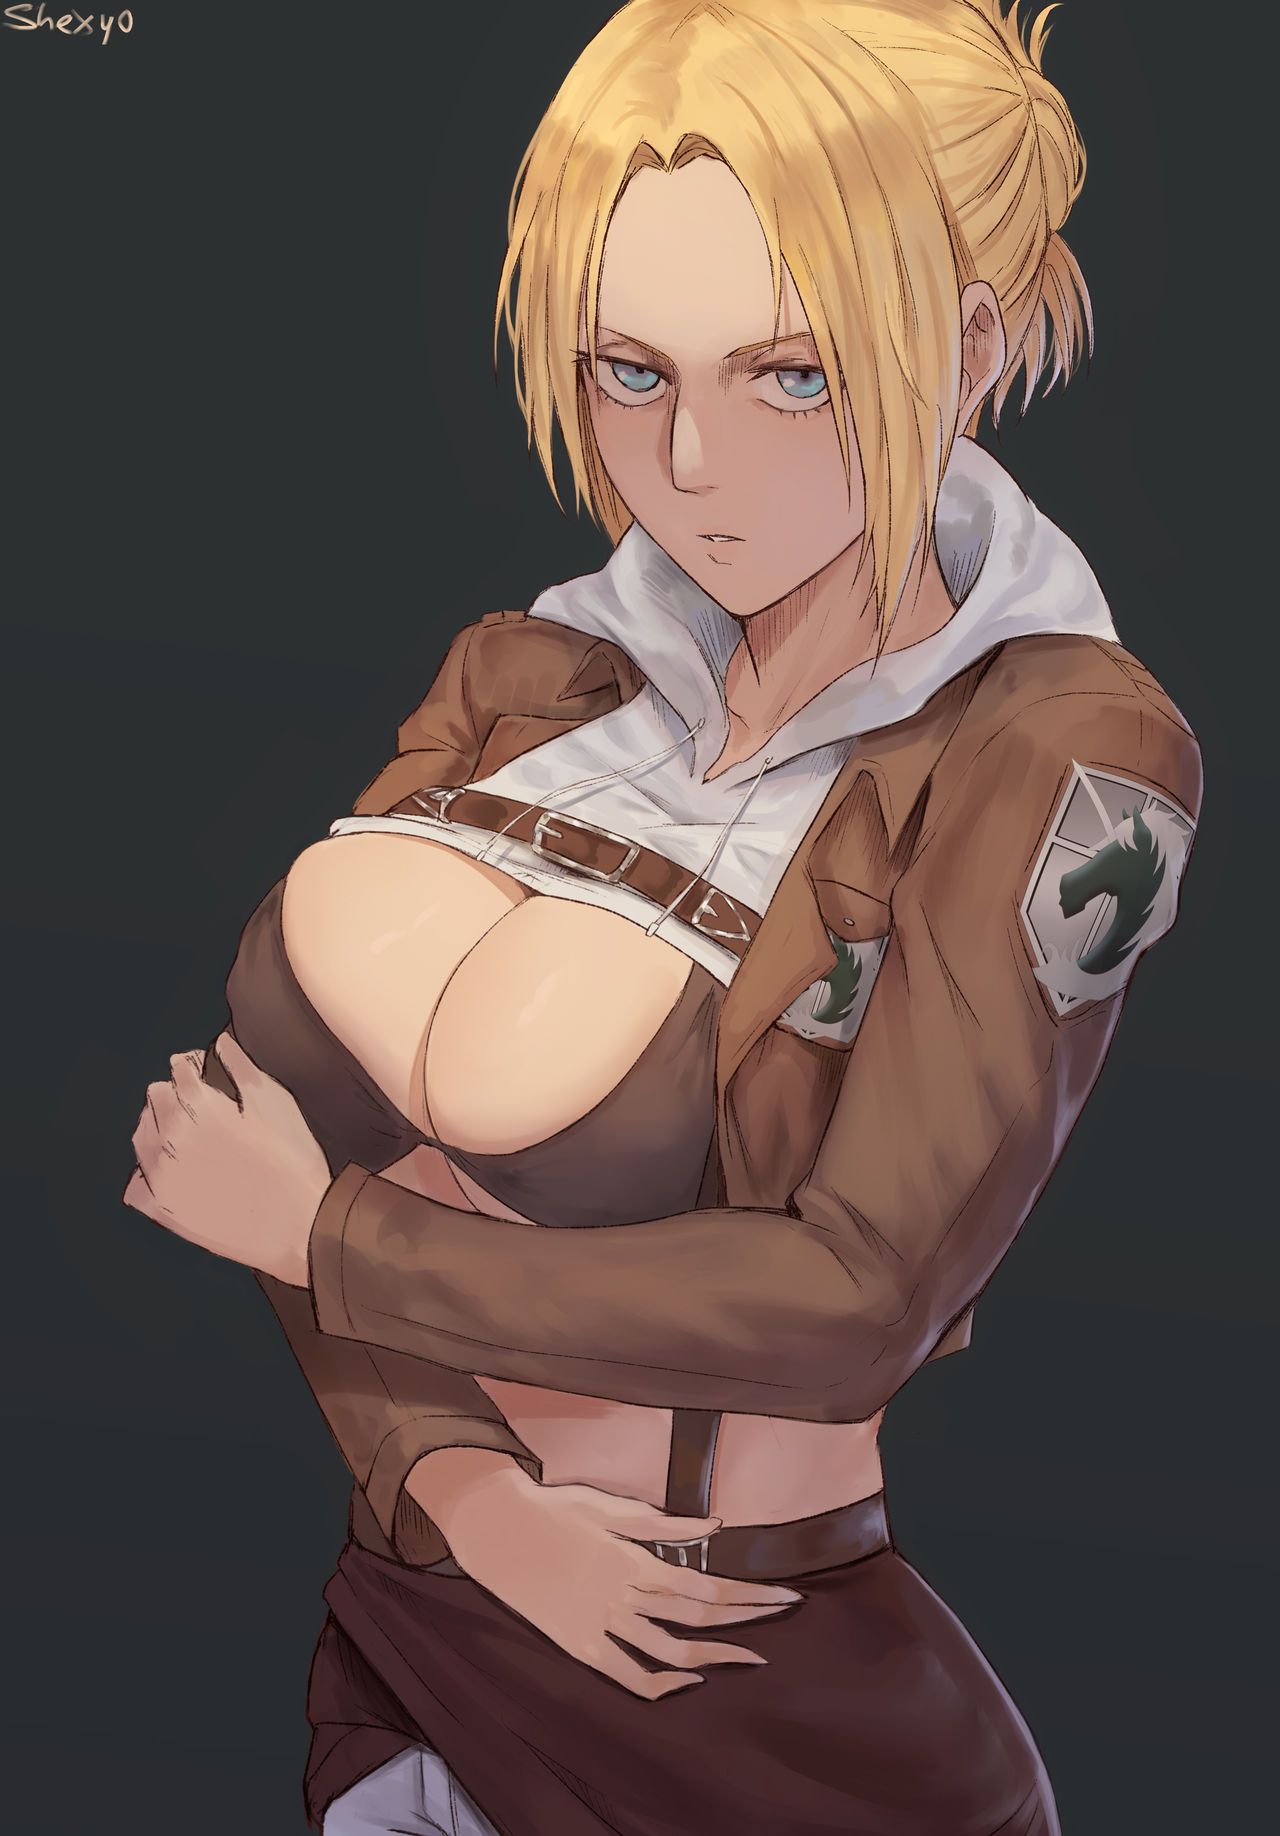 [Shexyo] Lewd Soldiers (Attack on Titan) 3